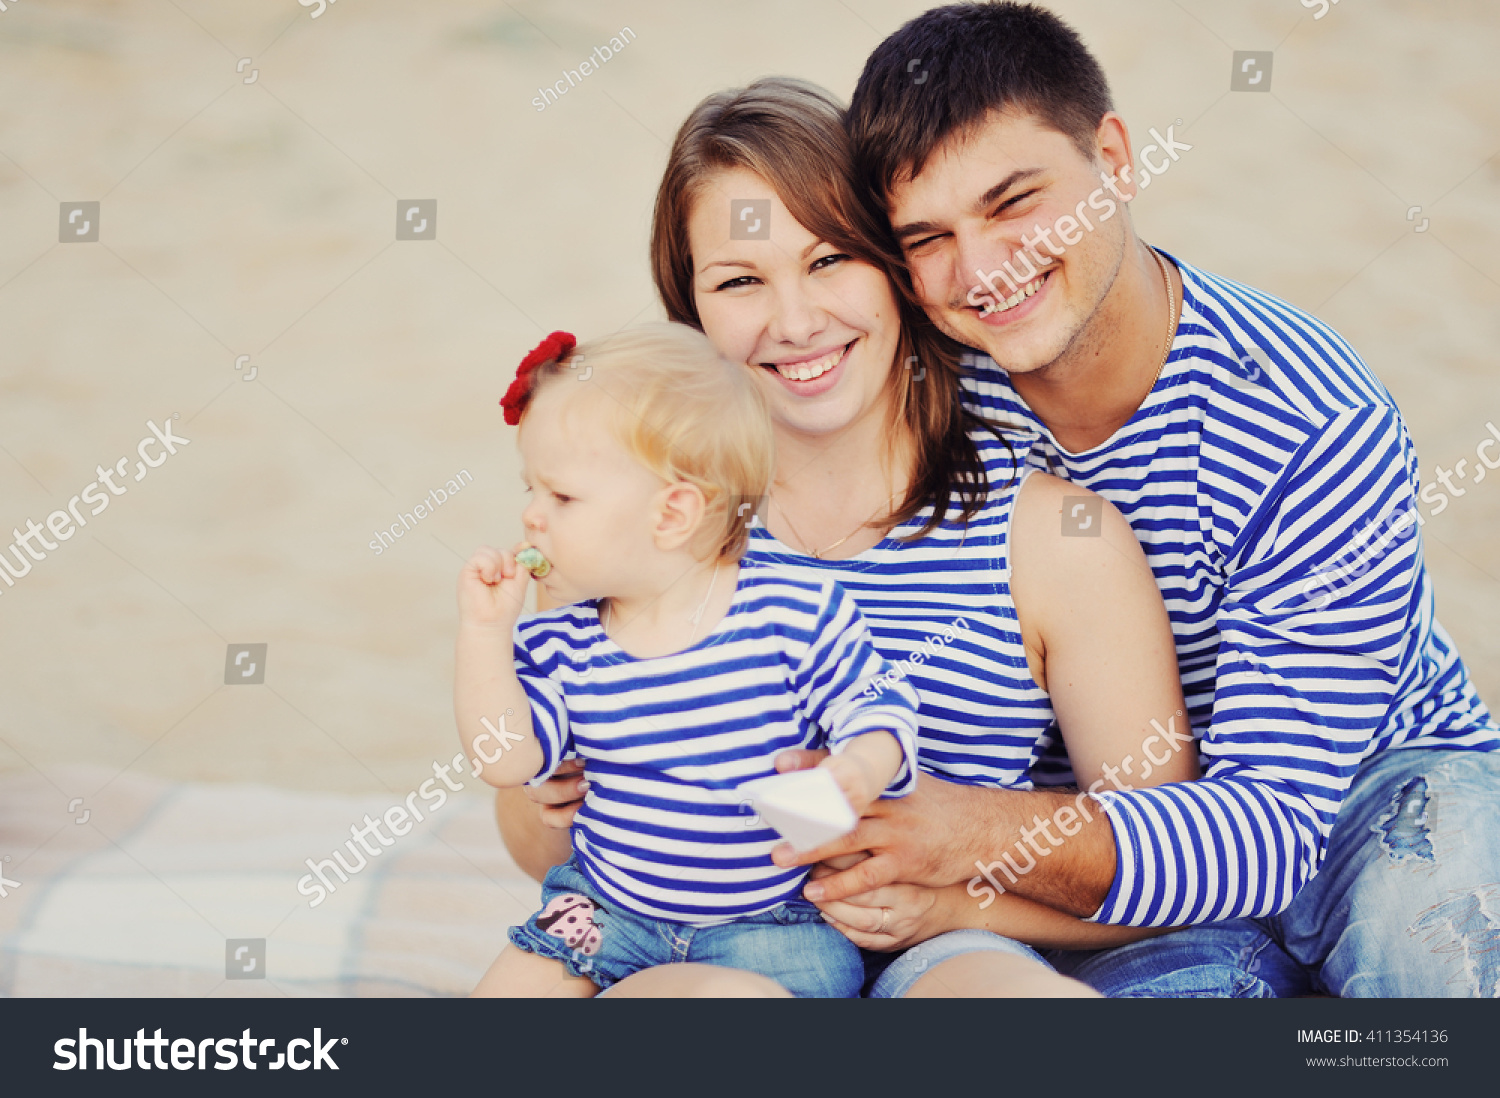 young the seaman on vacation with parents #411354136